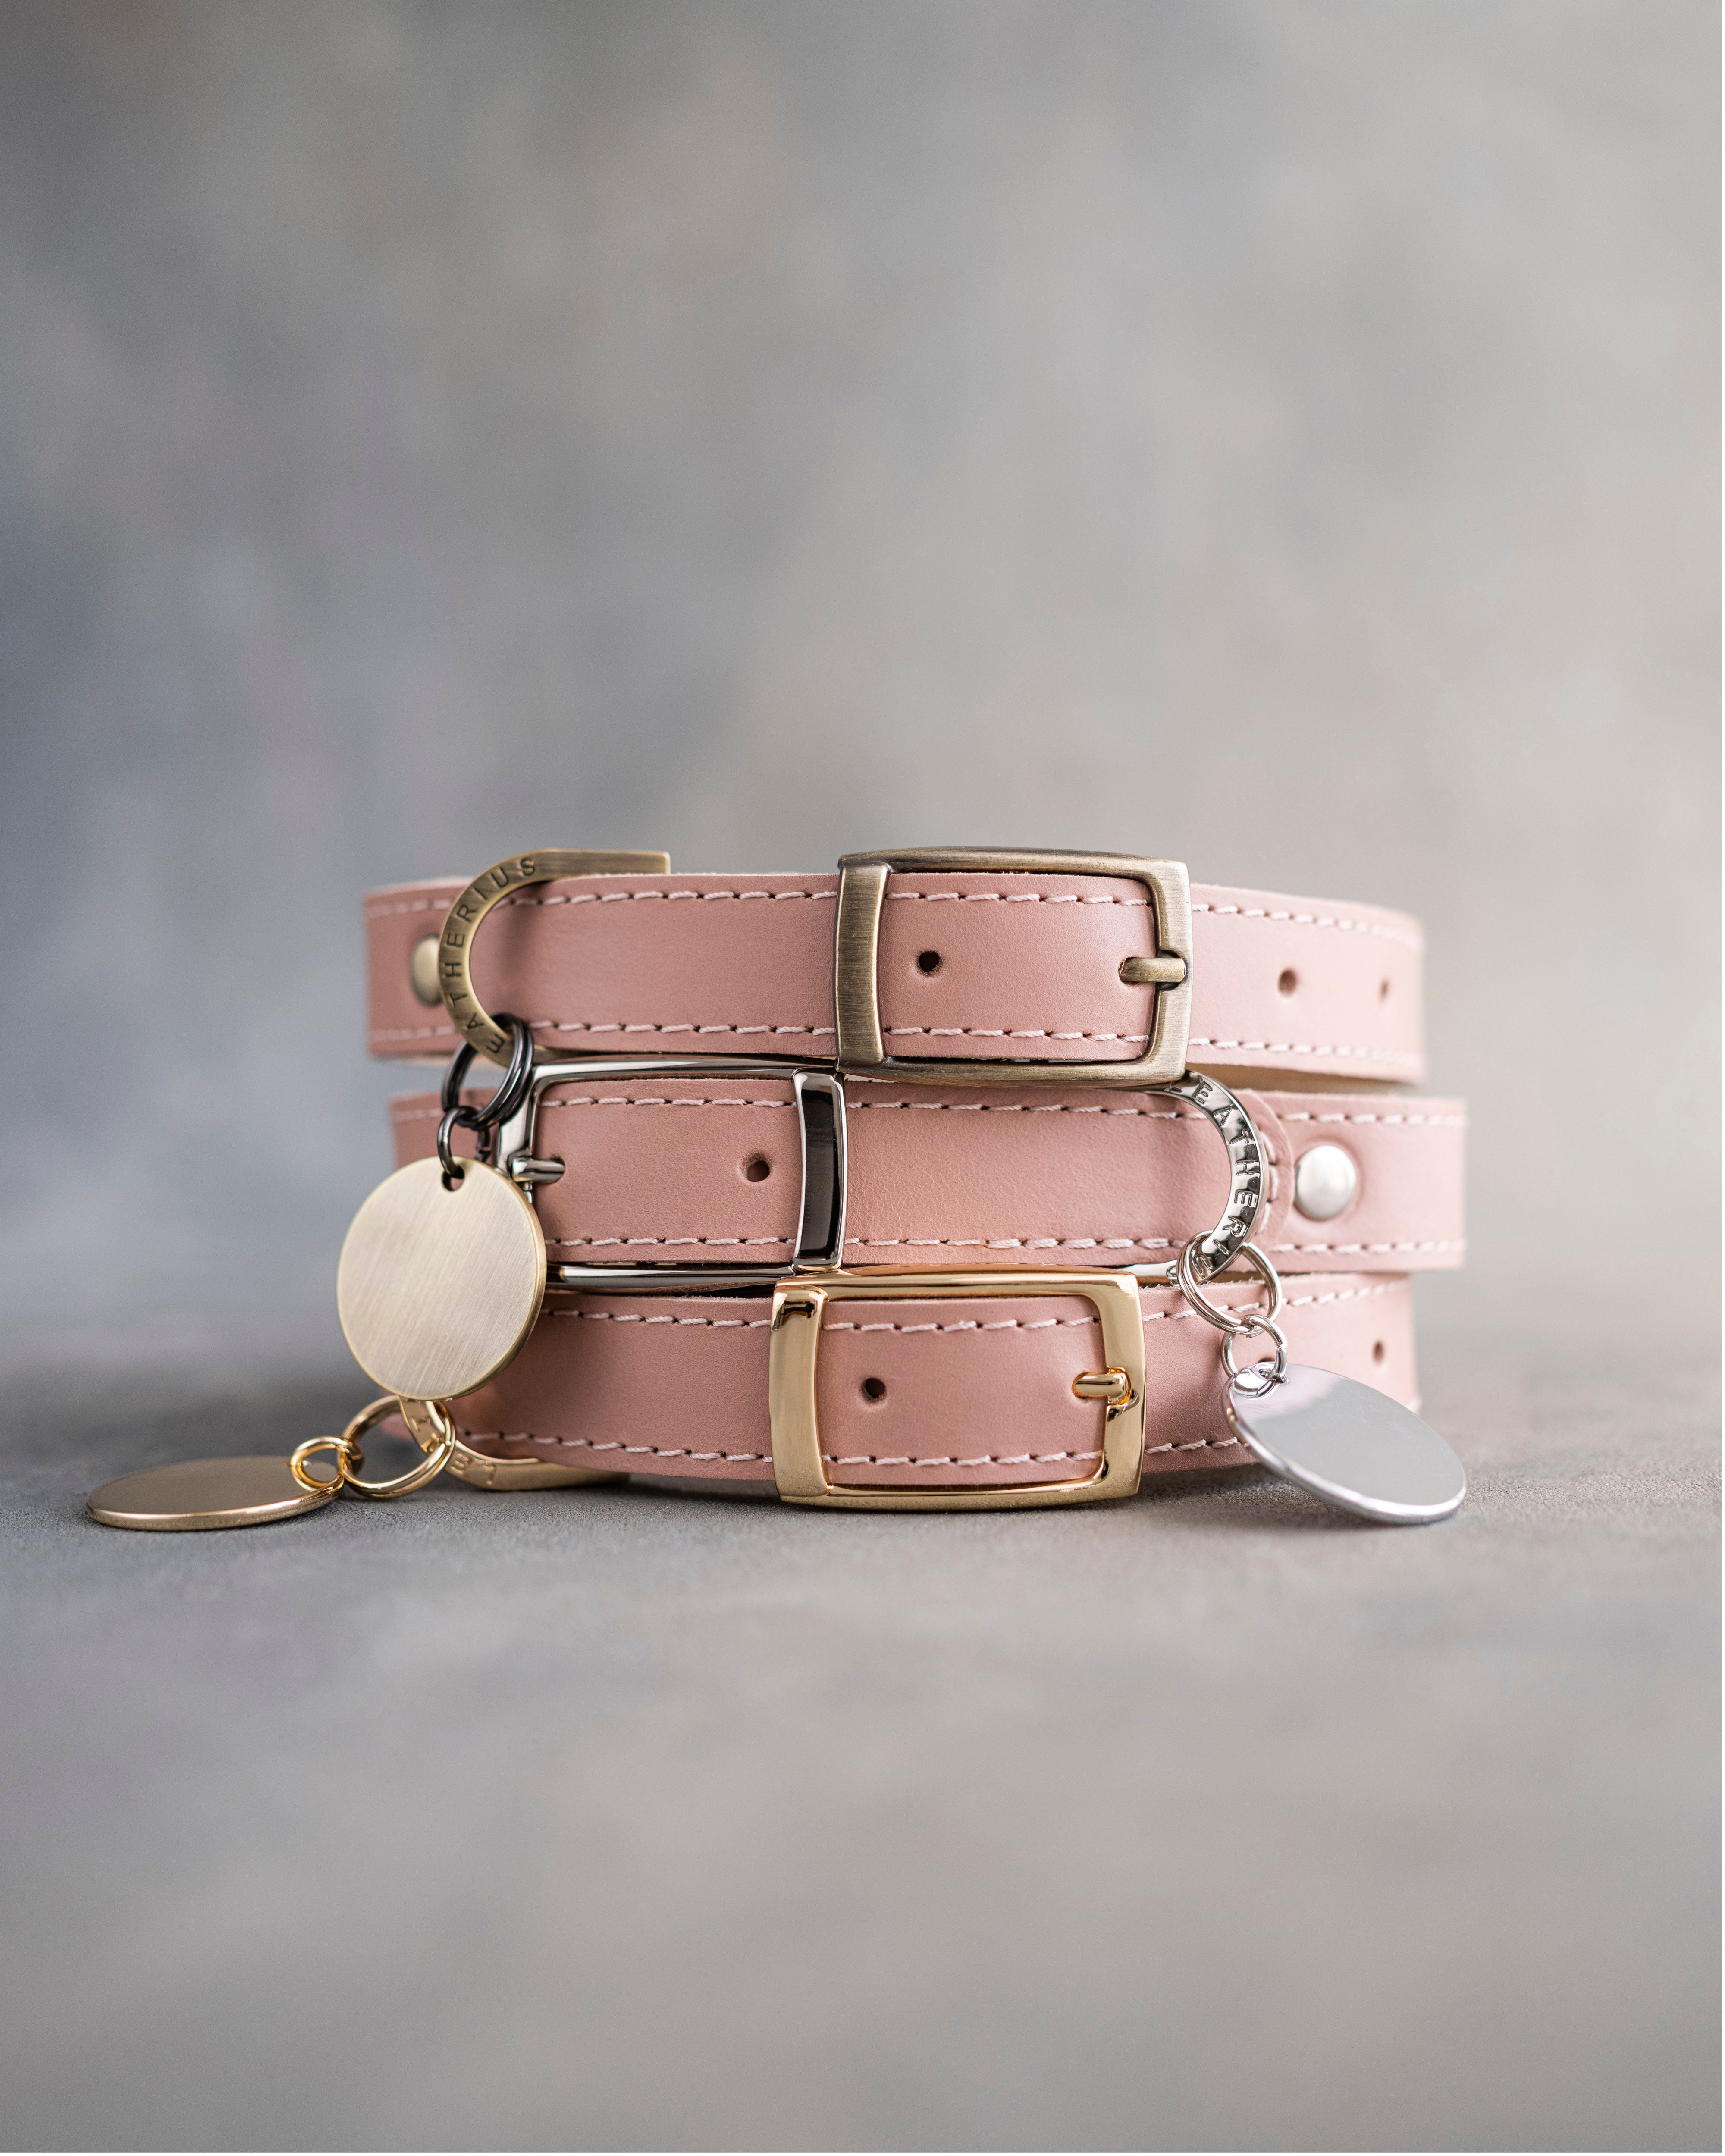 Dog Collar in Blush leather with classy pin buckle